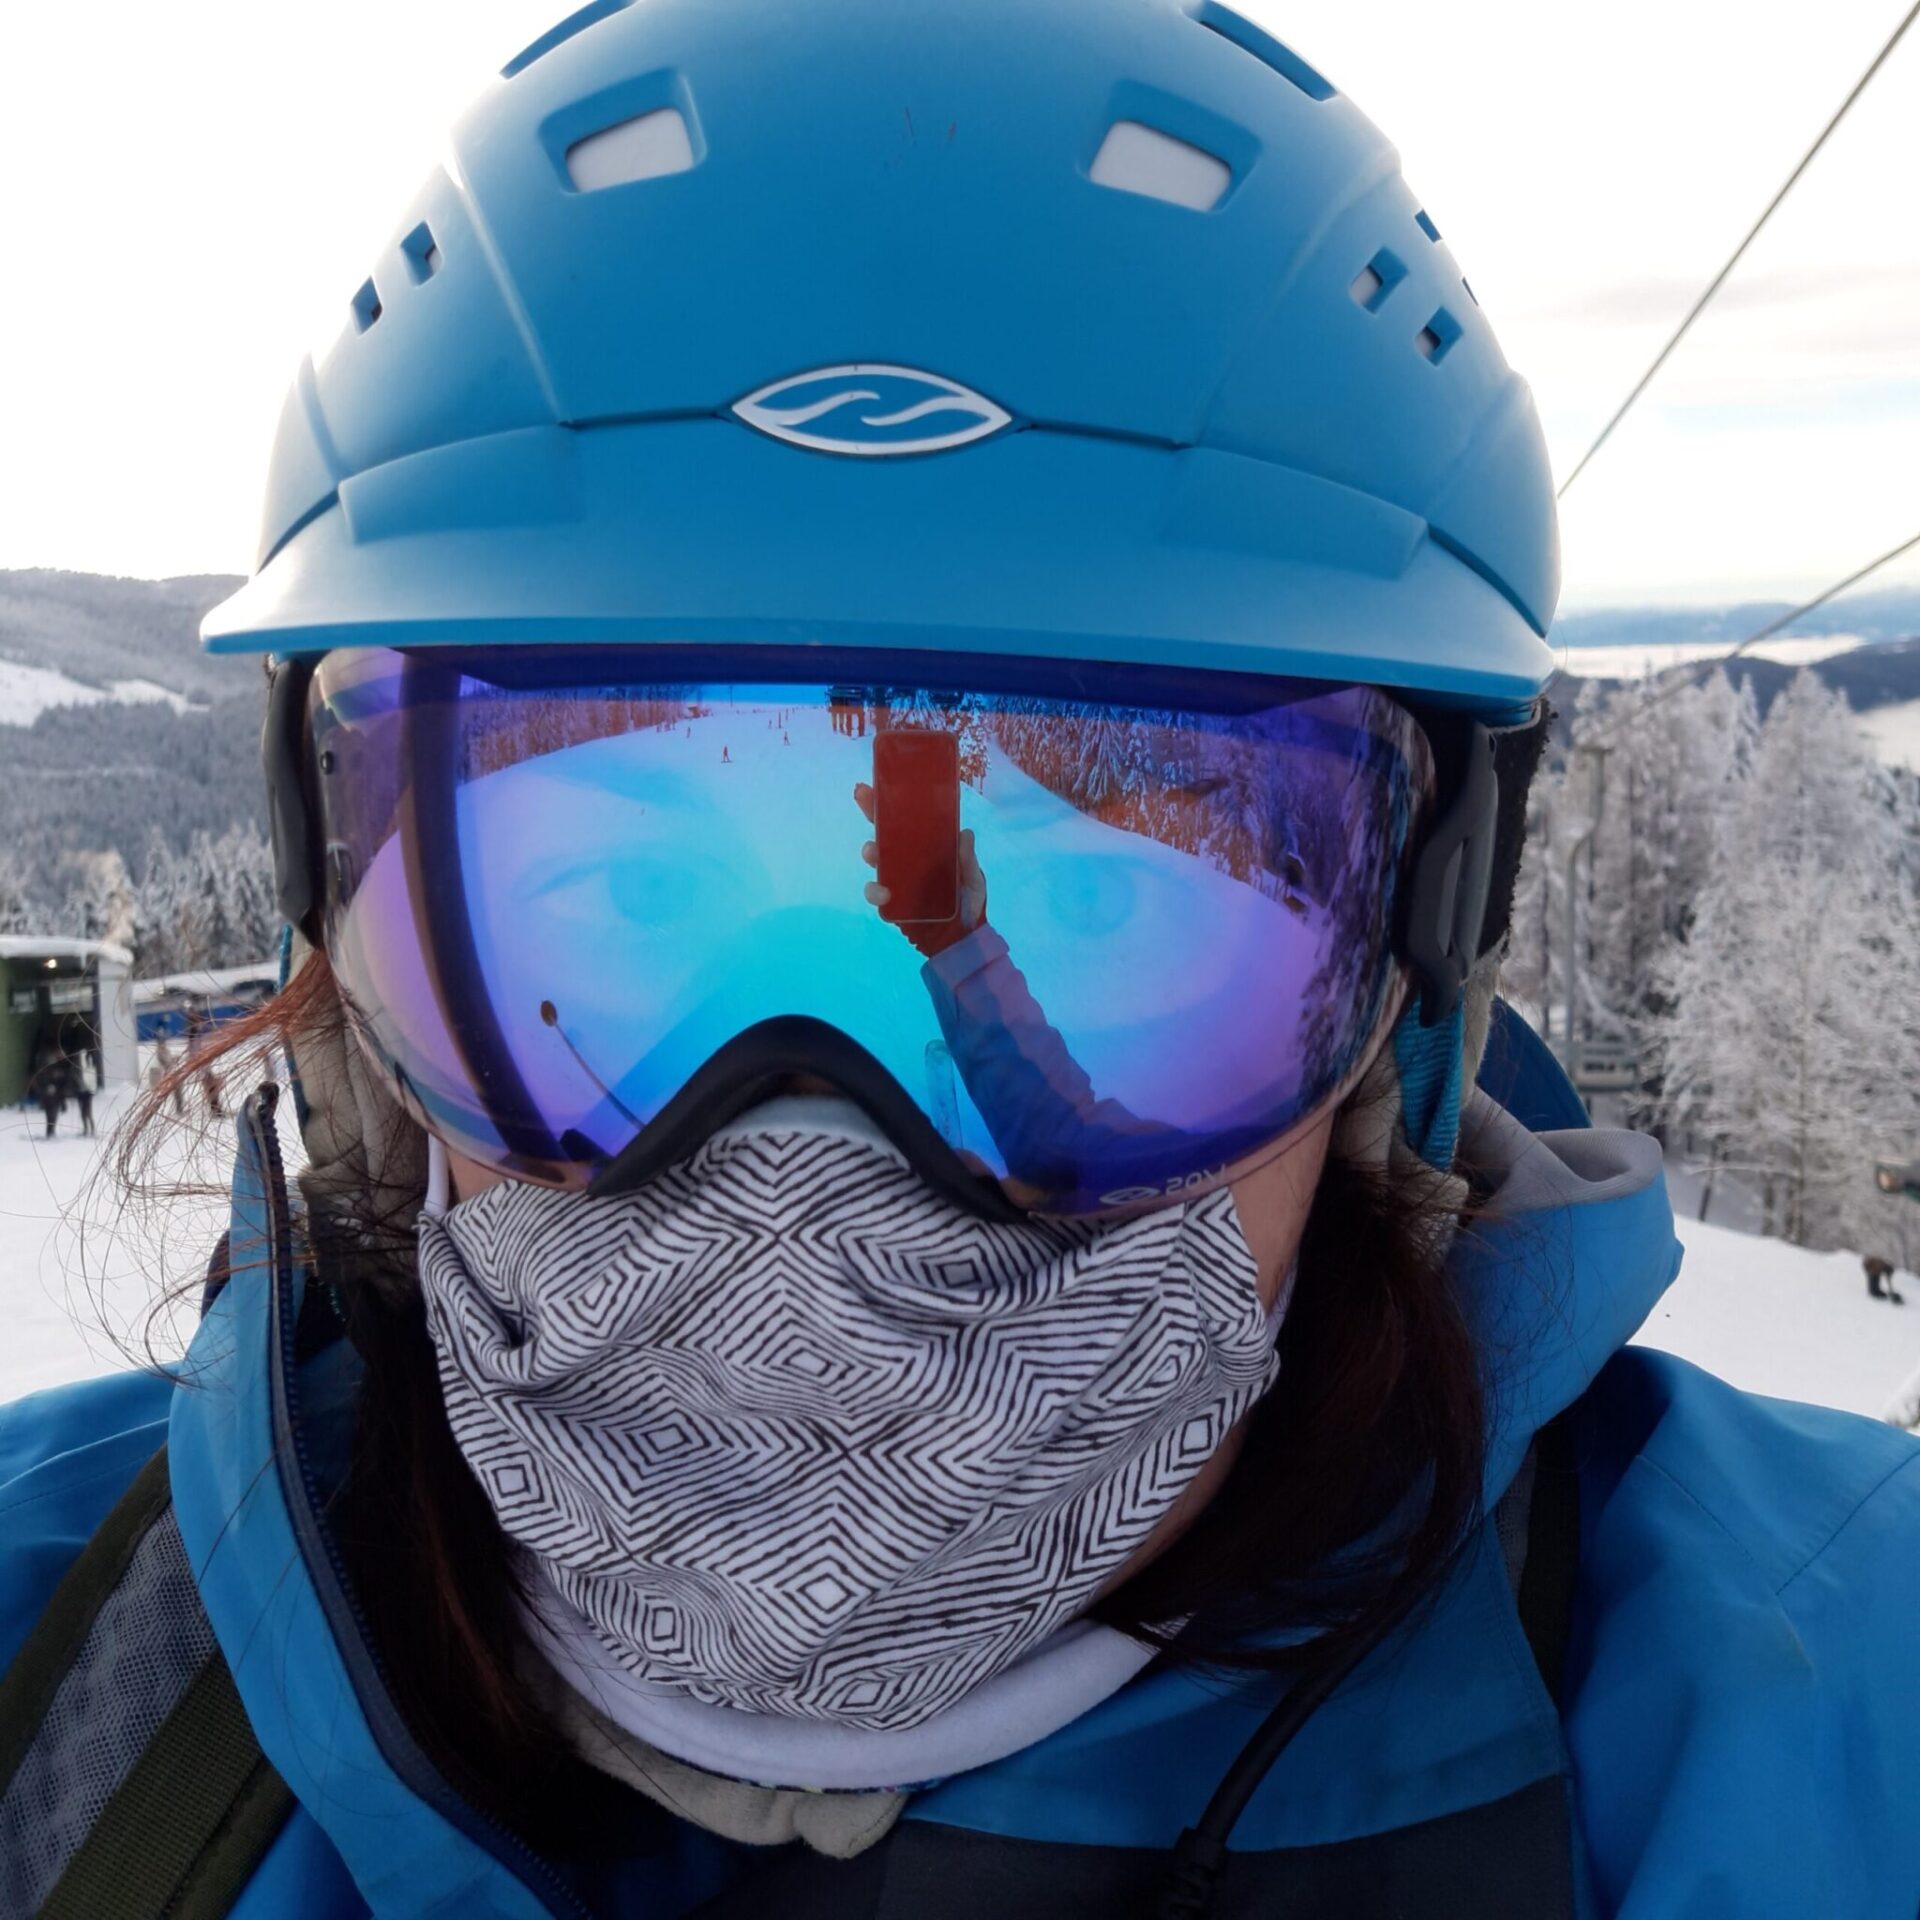 Person taking a selfie showing off their ski mask and helmet.